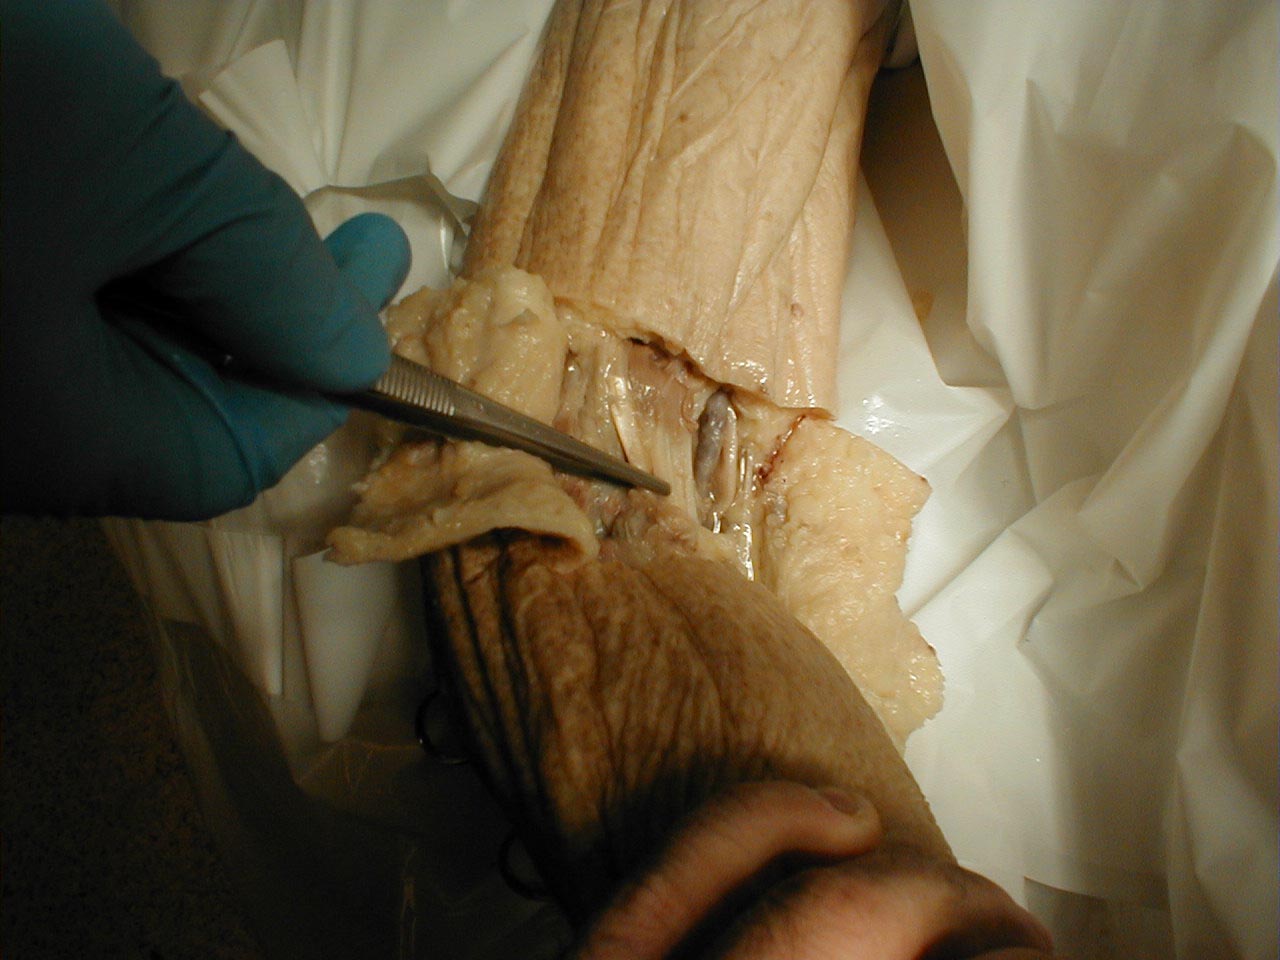 Biceps tendon: The tendon is grasped by forceps (gross dissection)